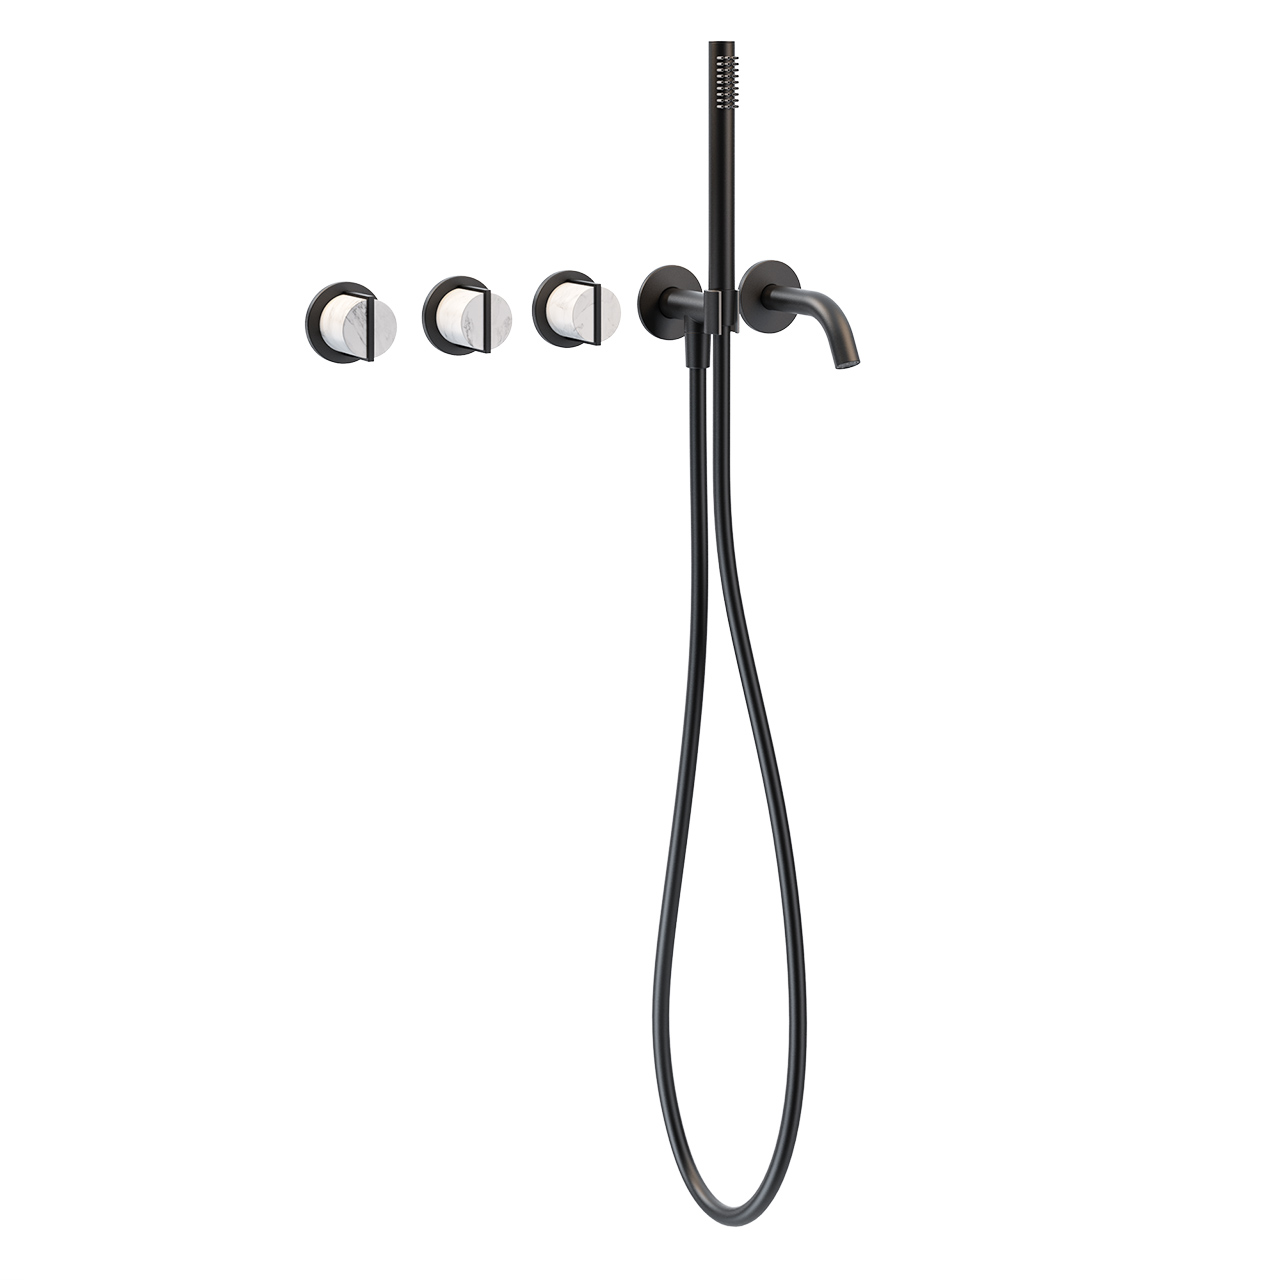 M305 Shower and Bathtub Mixer by Varied Forms